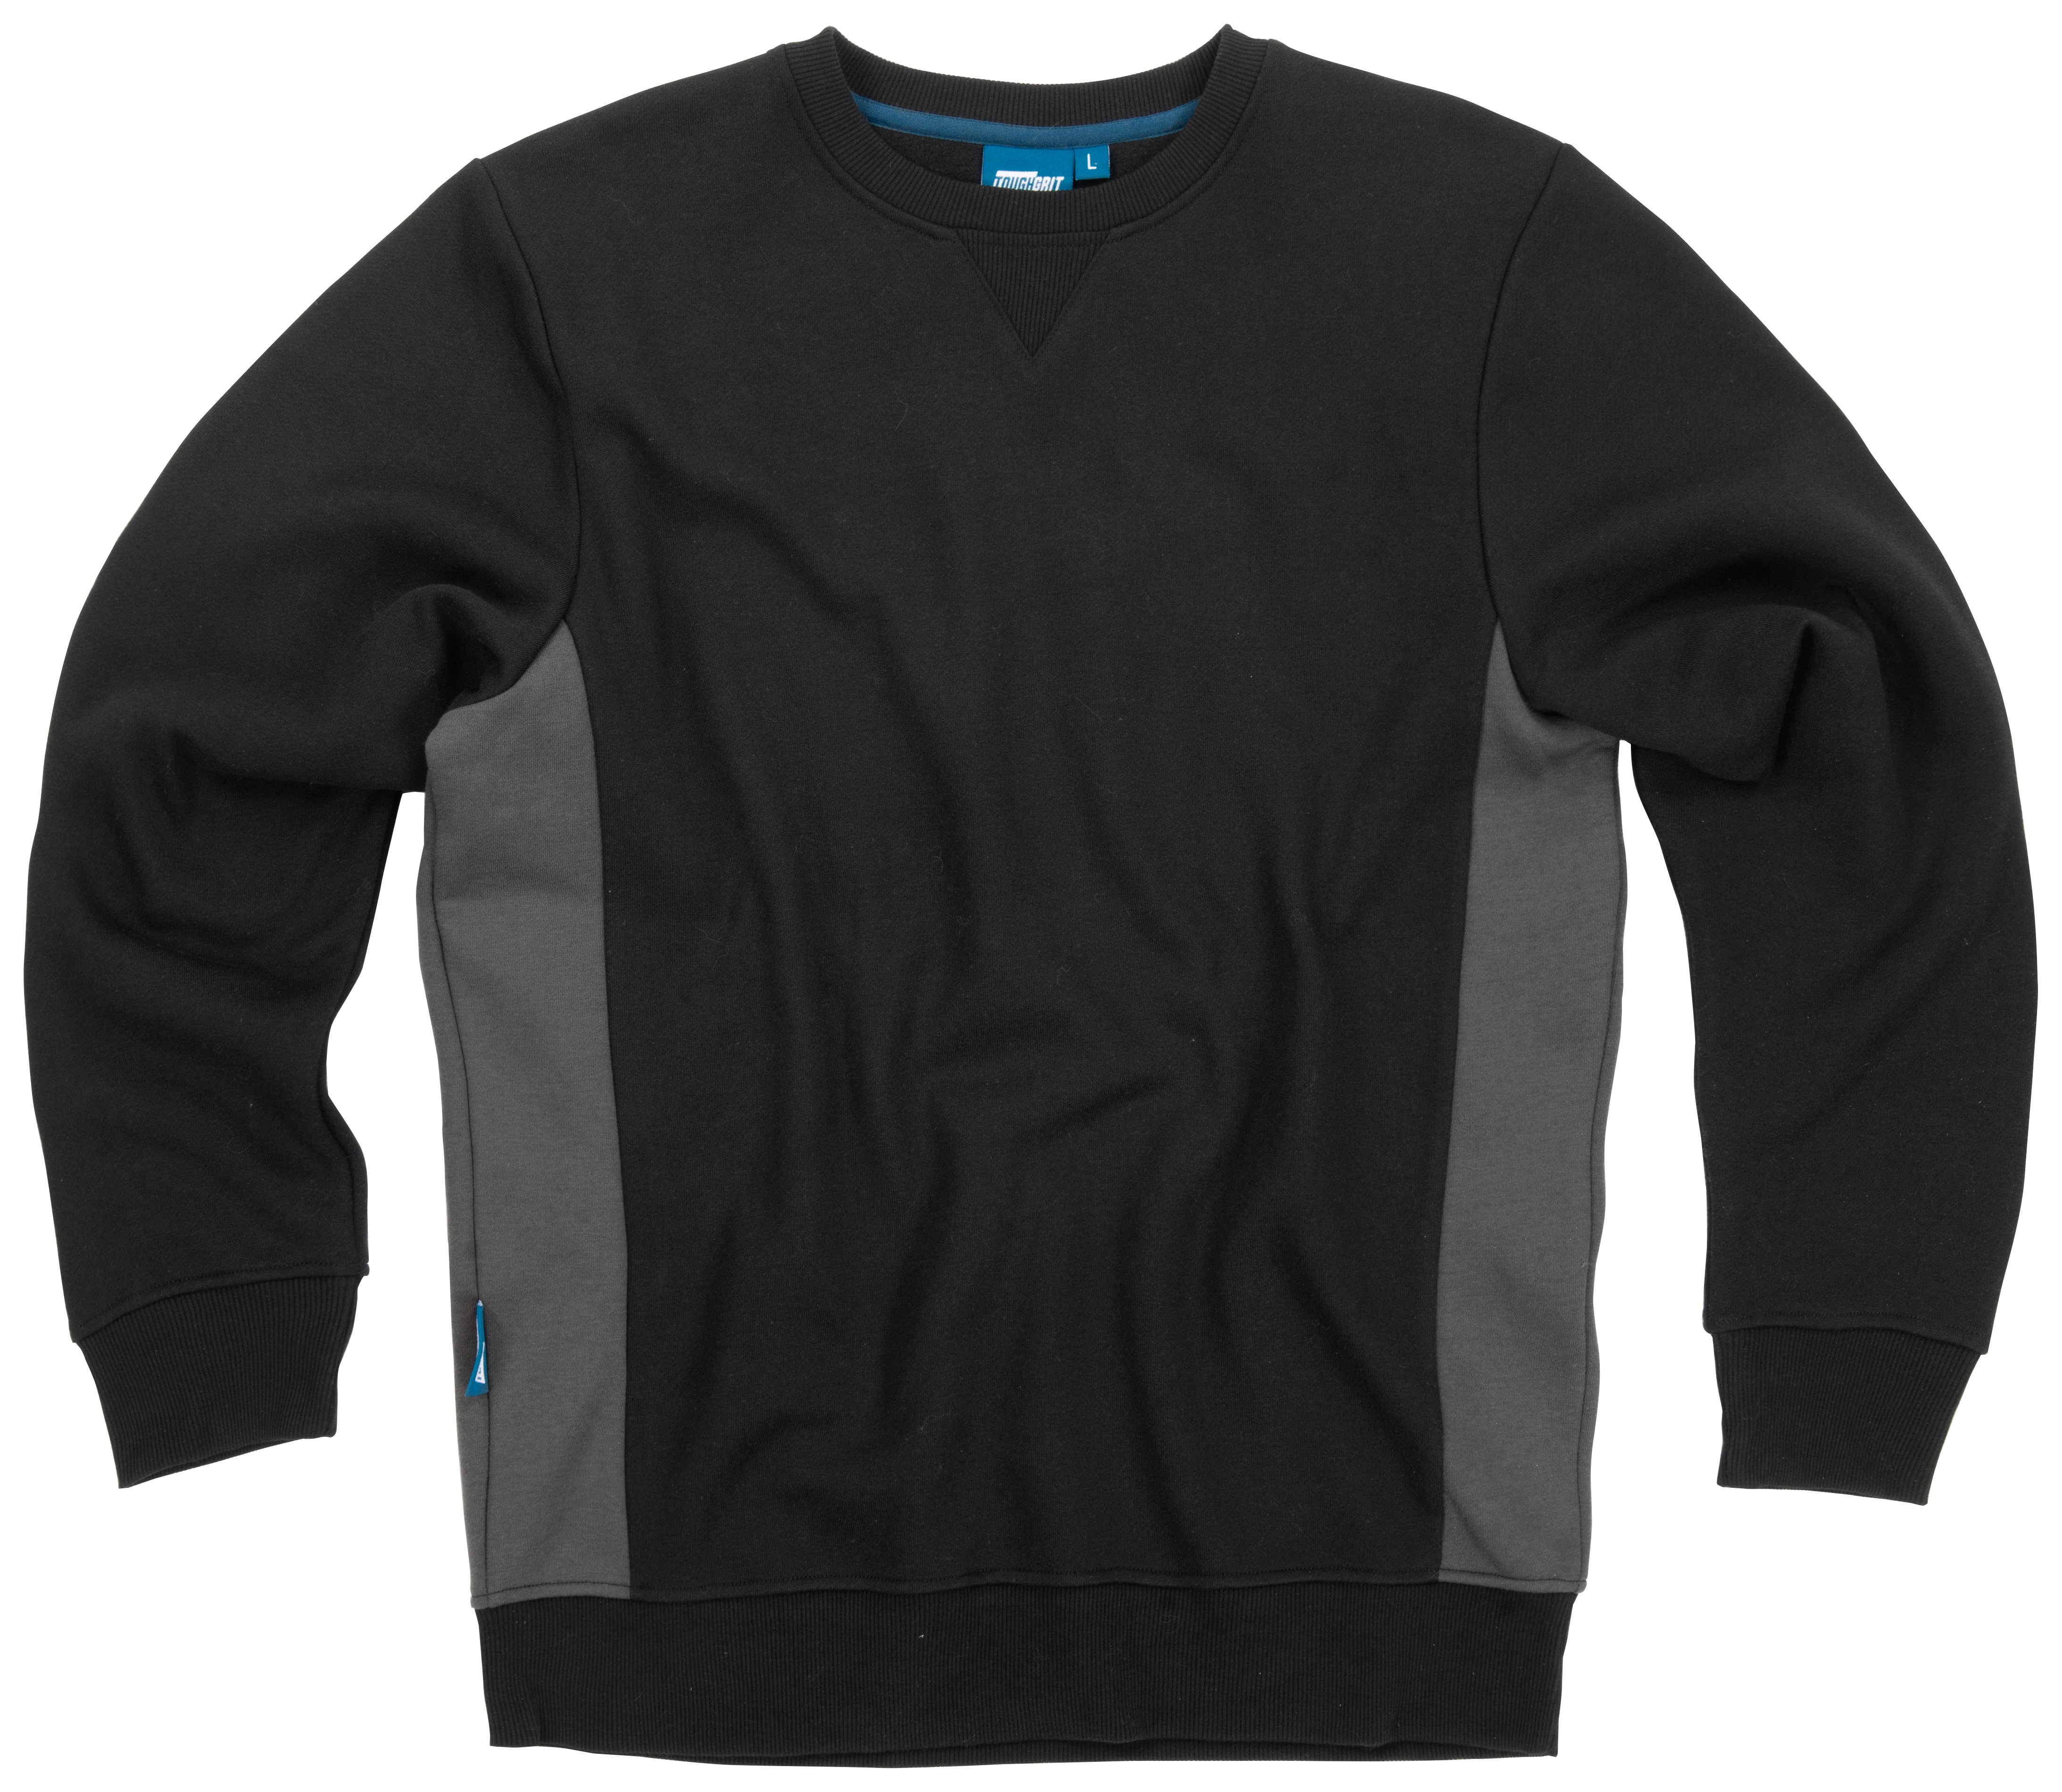 Image of Tough Grit Sweatshirt, in Black and Grey, Size: M